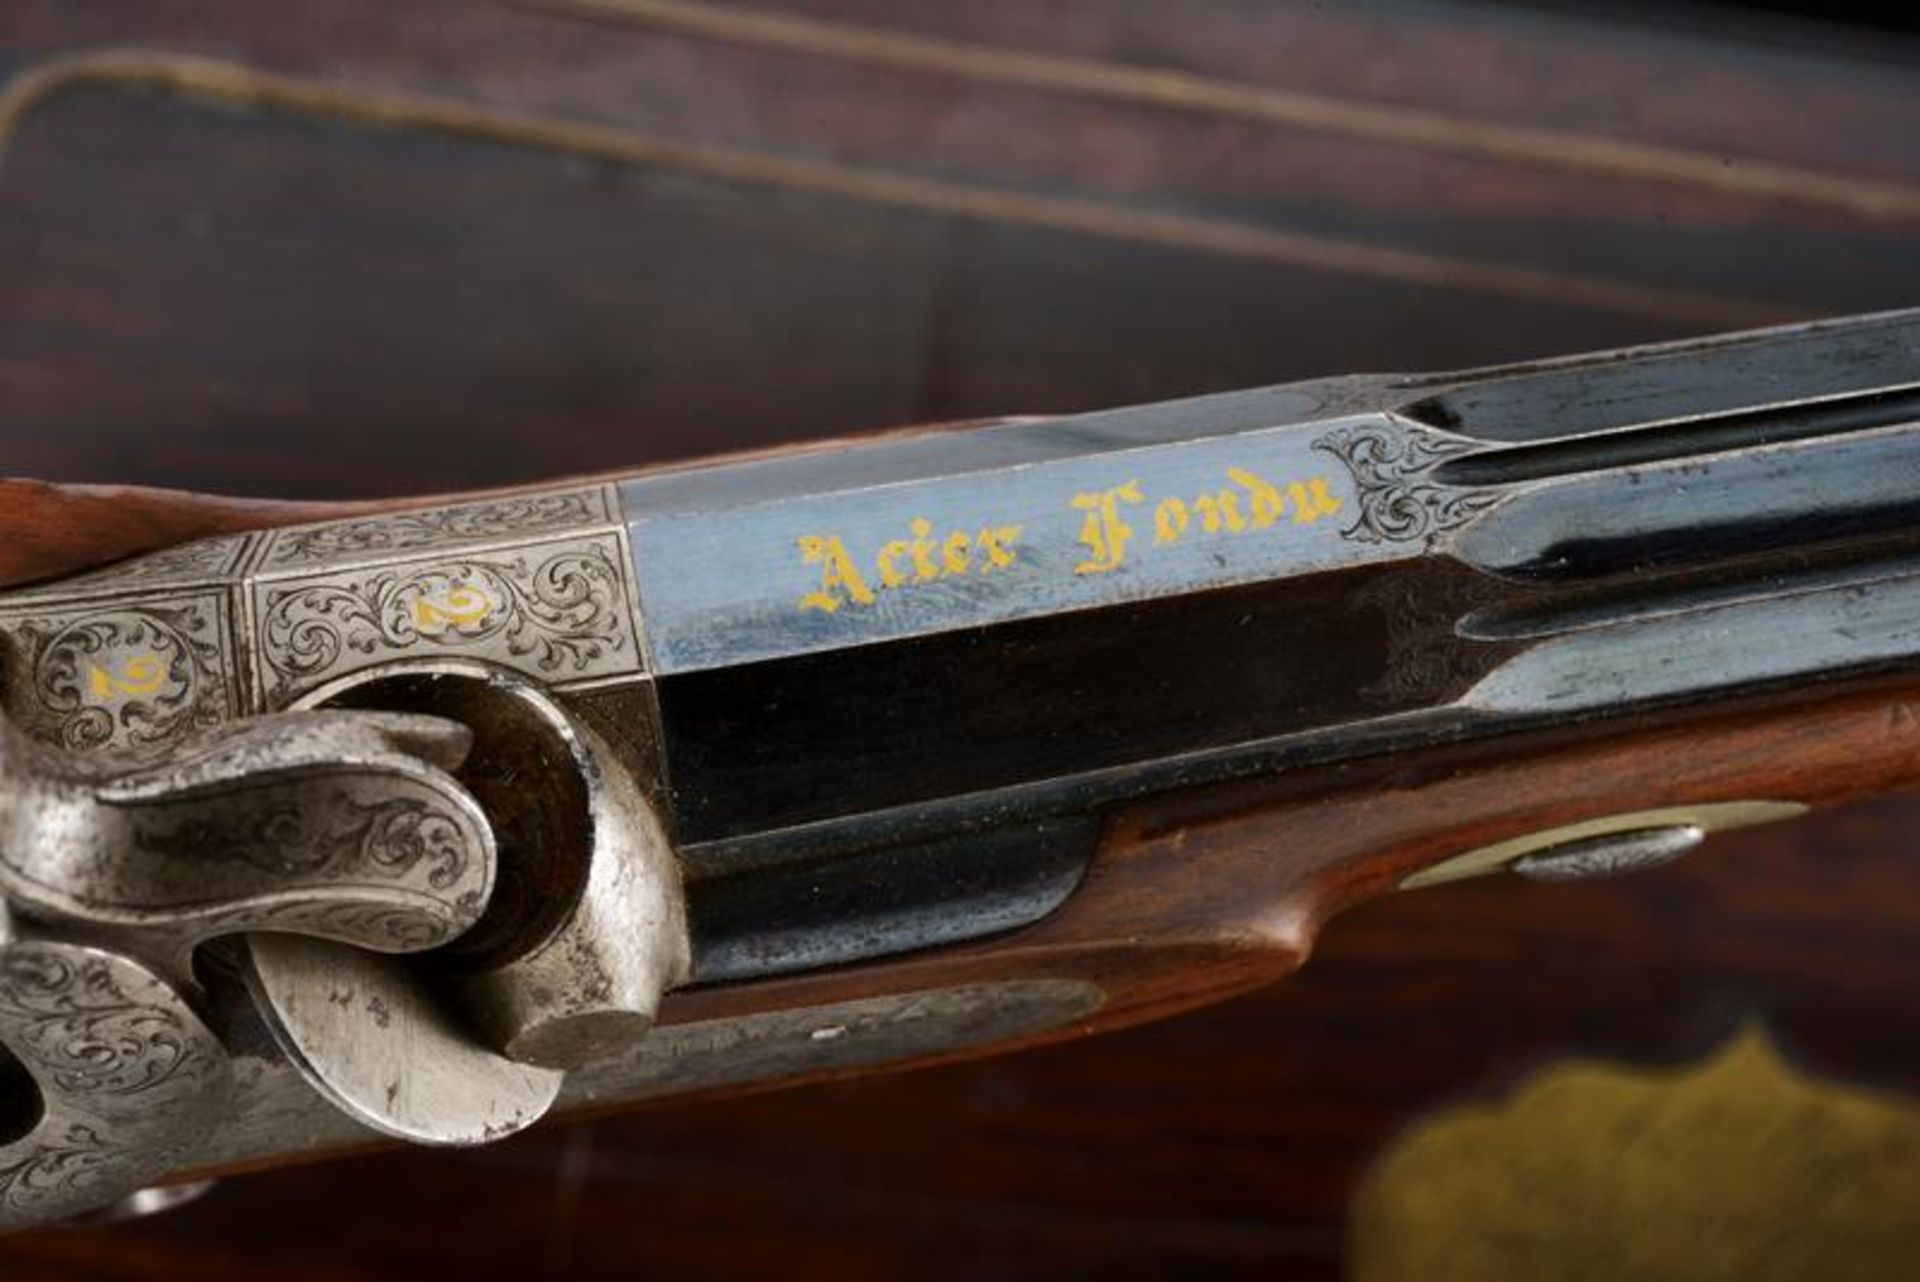 A fine pair of cased percussion pistols by J. B. Ronge, shooting tournament 1st price - Image 9 of 11